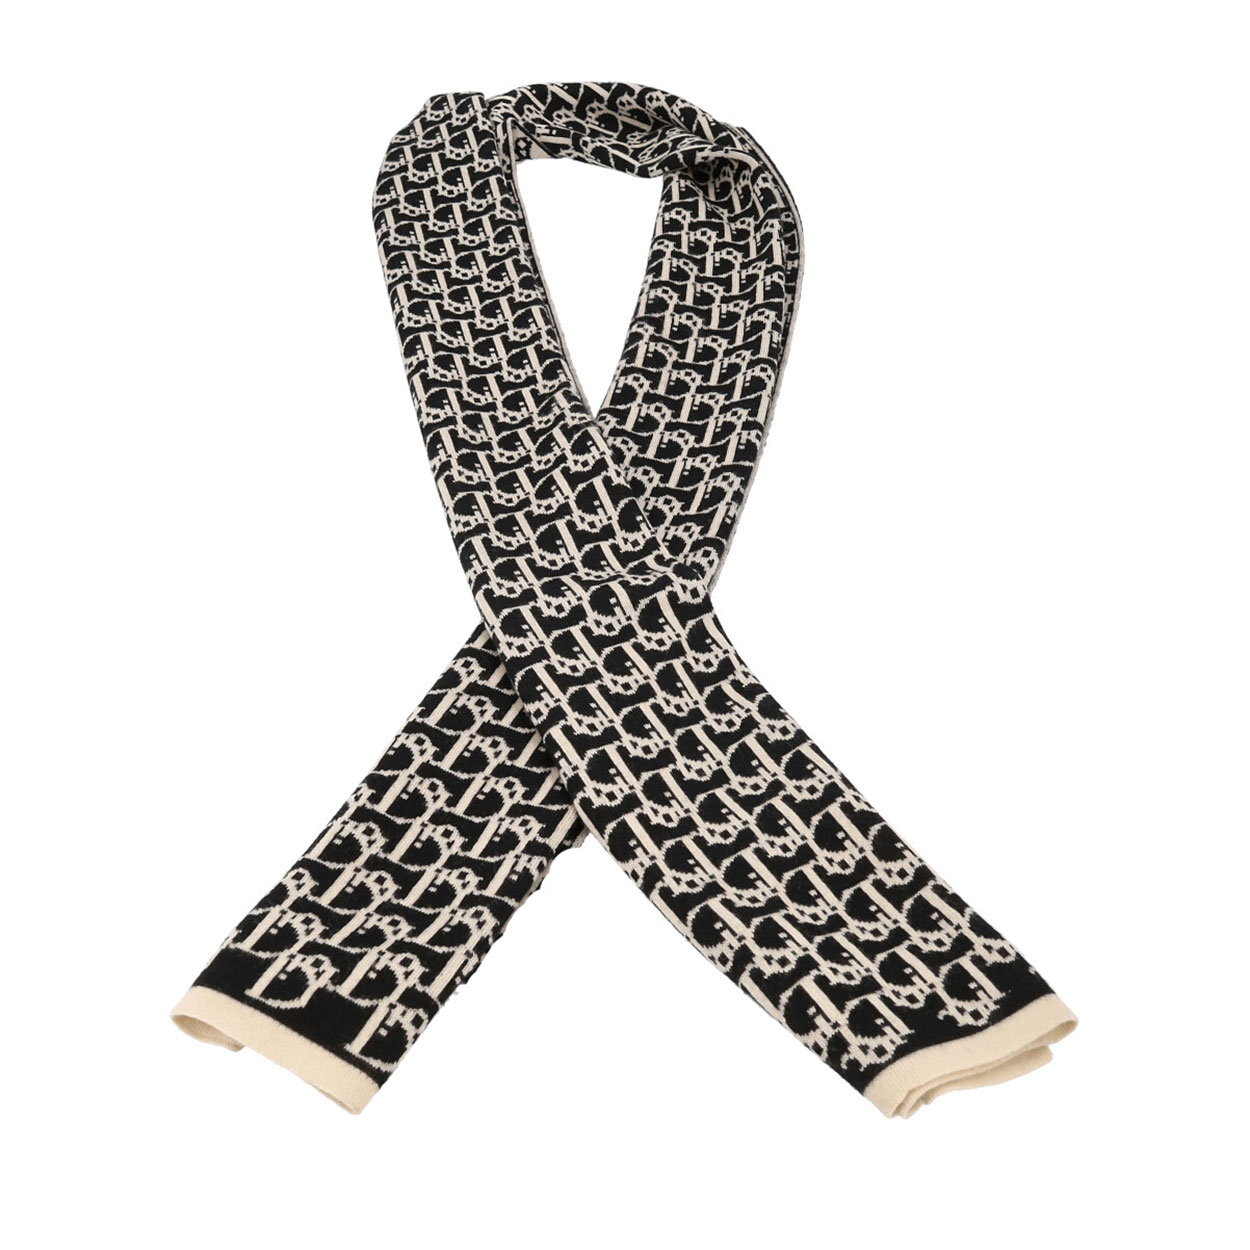 CHRISTIAN DIOR Wool Diorissimo Scarf Black/Beige | Luxity